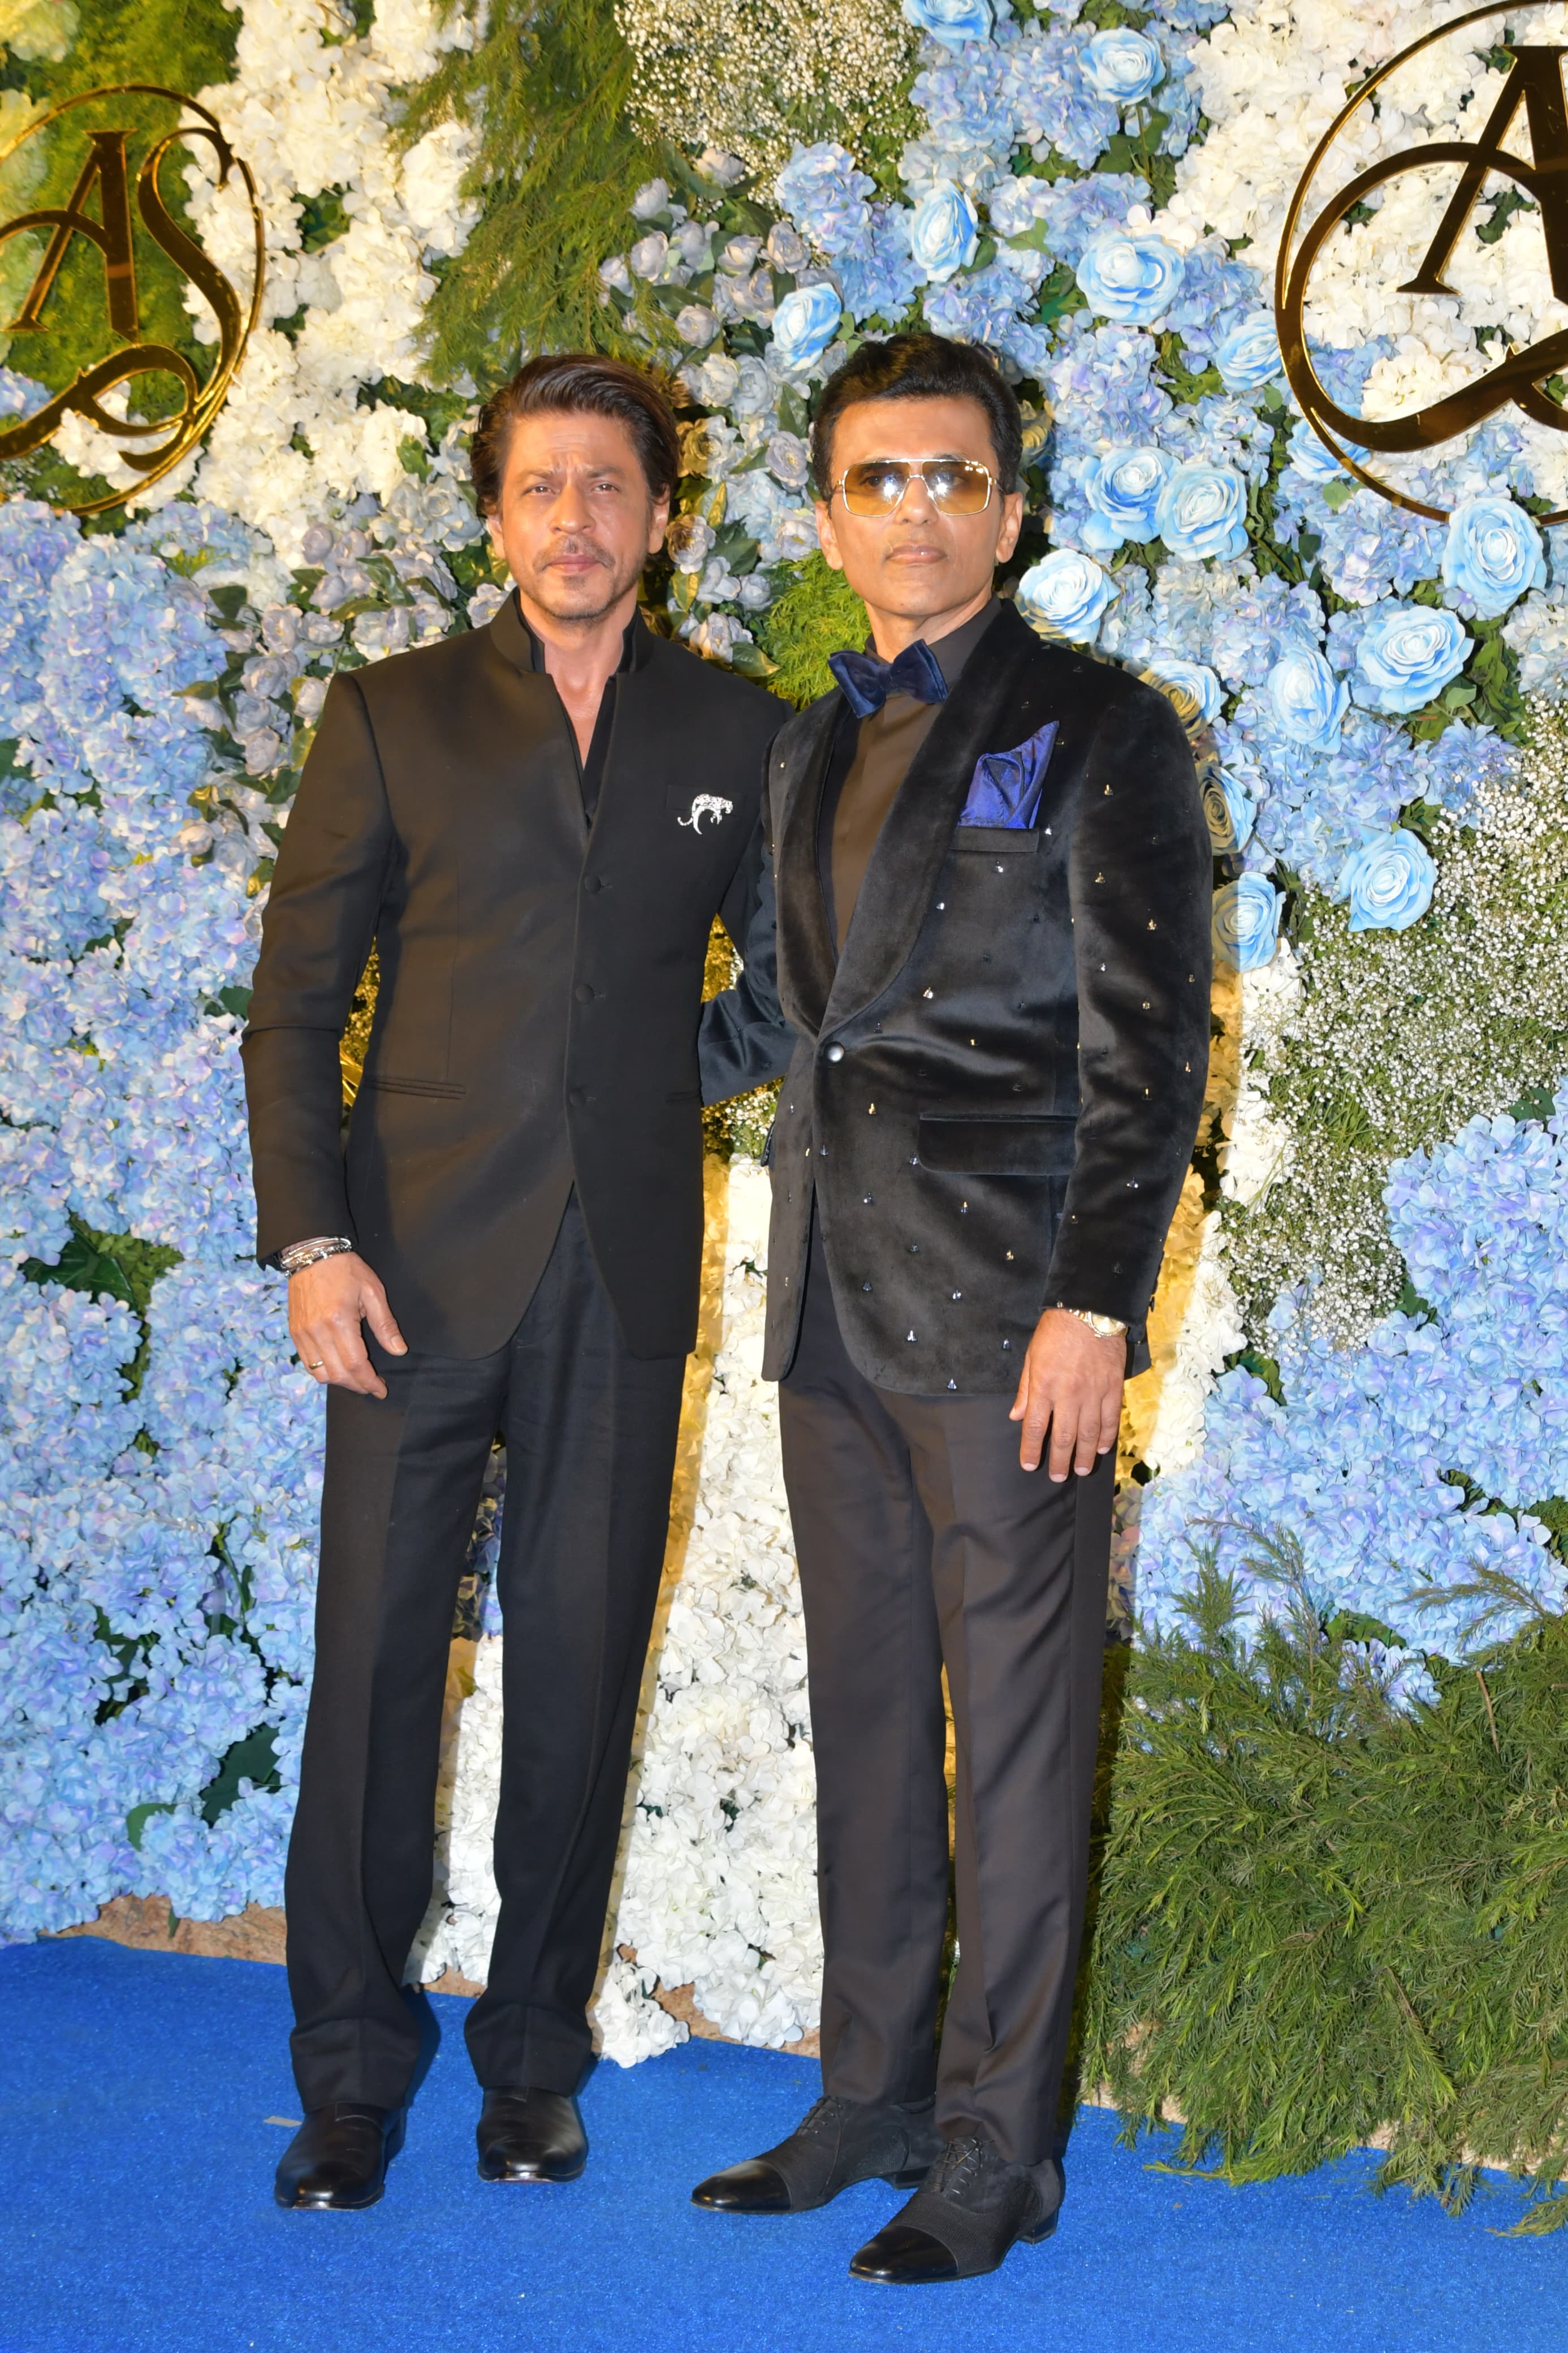 Bollywood's Badshah, Shah Rukh Khan, attended the party and posed for Anand Pandit himself